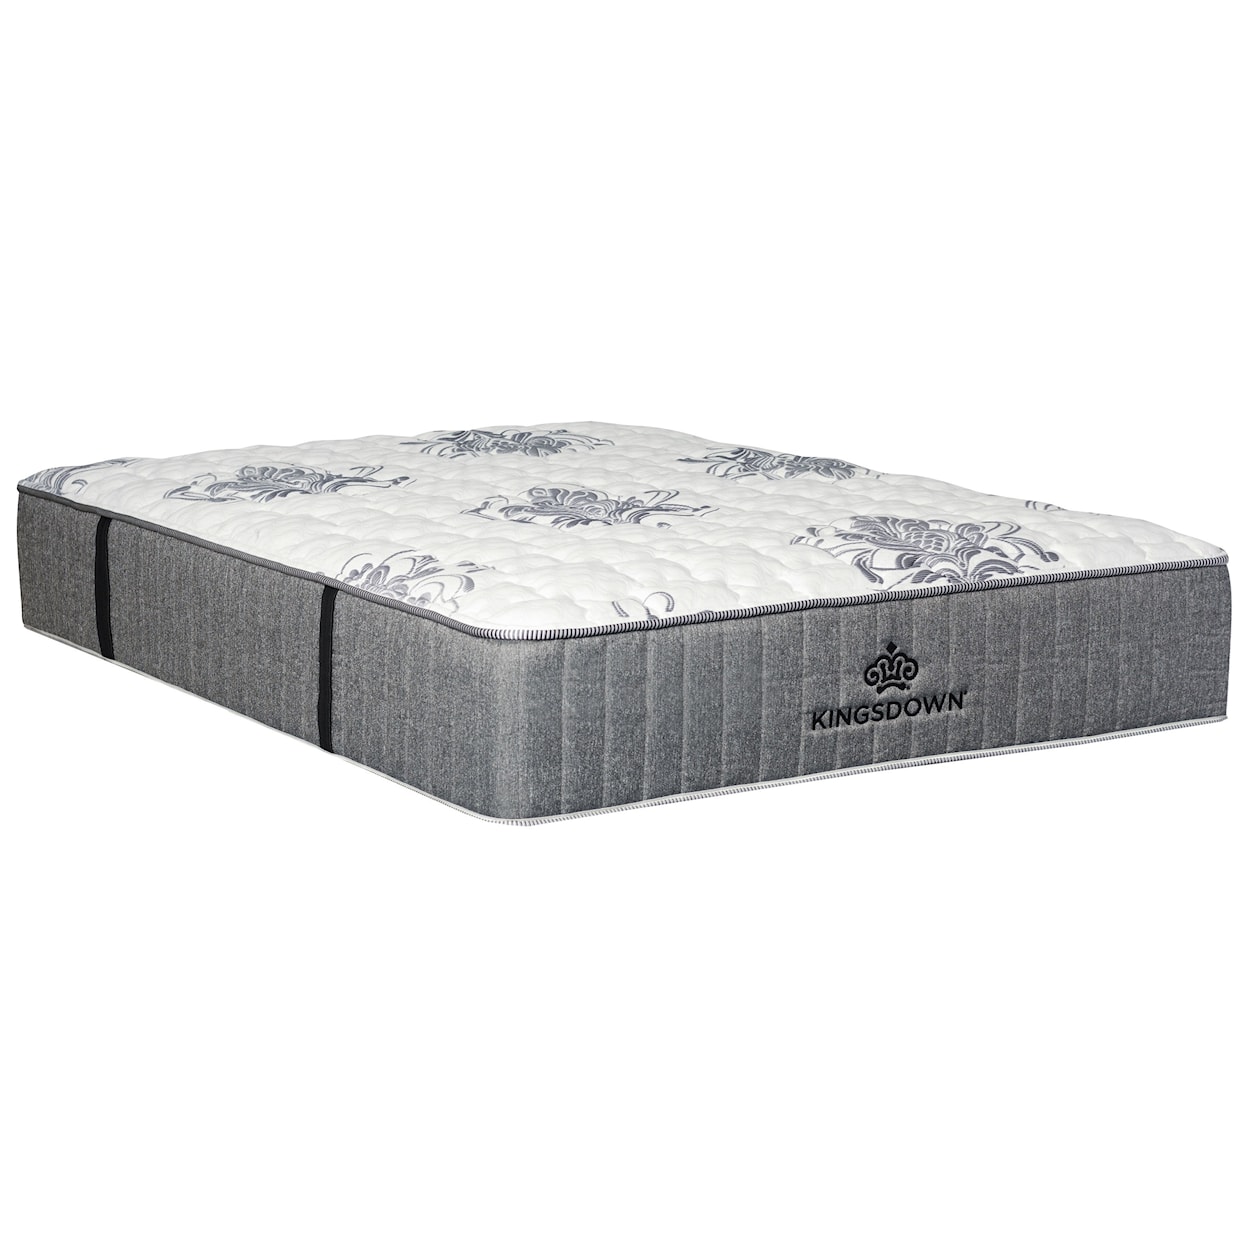 Kingsdown Passions Zest Firm King 14 1/2" Firm Coil on Coil Mattress